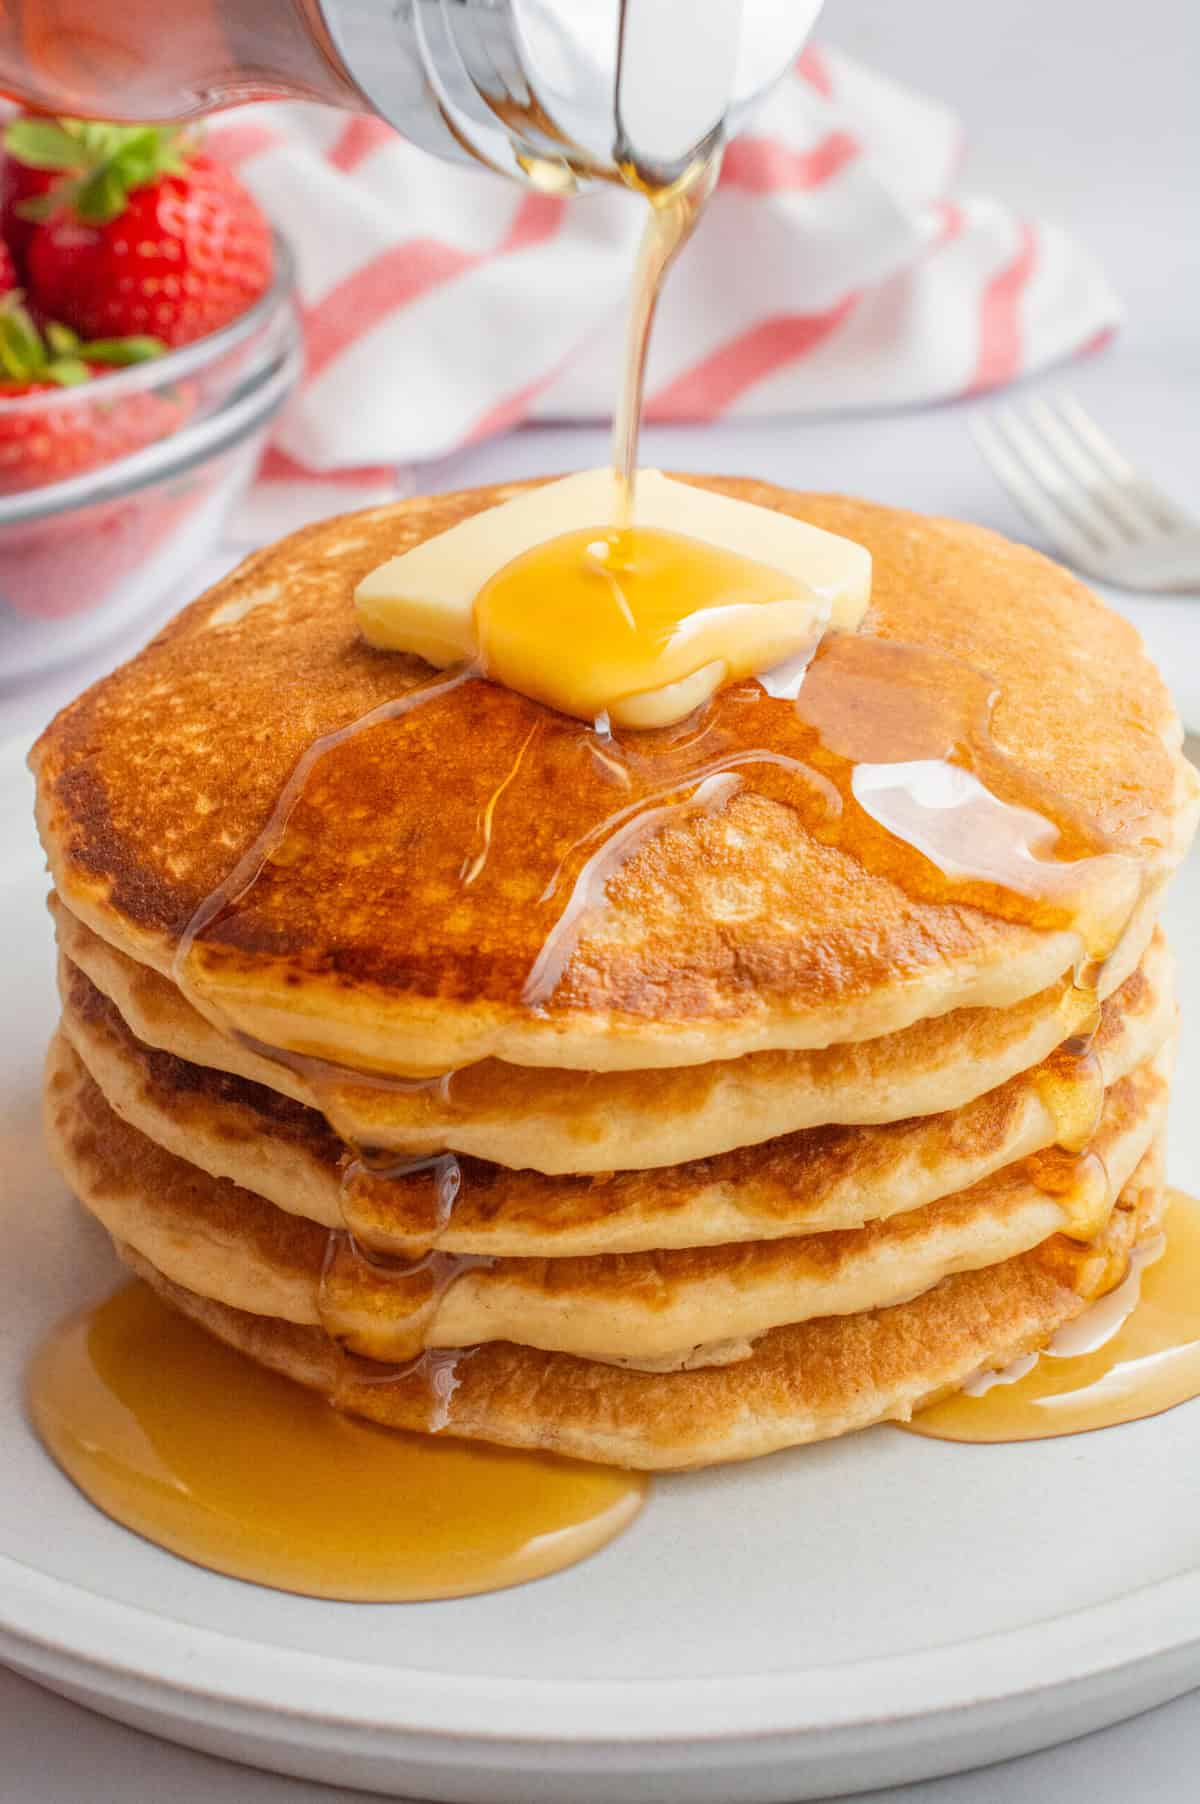 Syrup being poured on a stack of vegan buttermilk pancakes topped with butter.